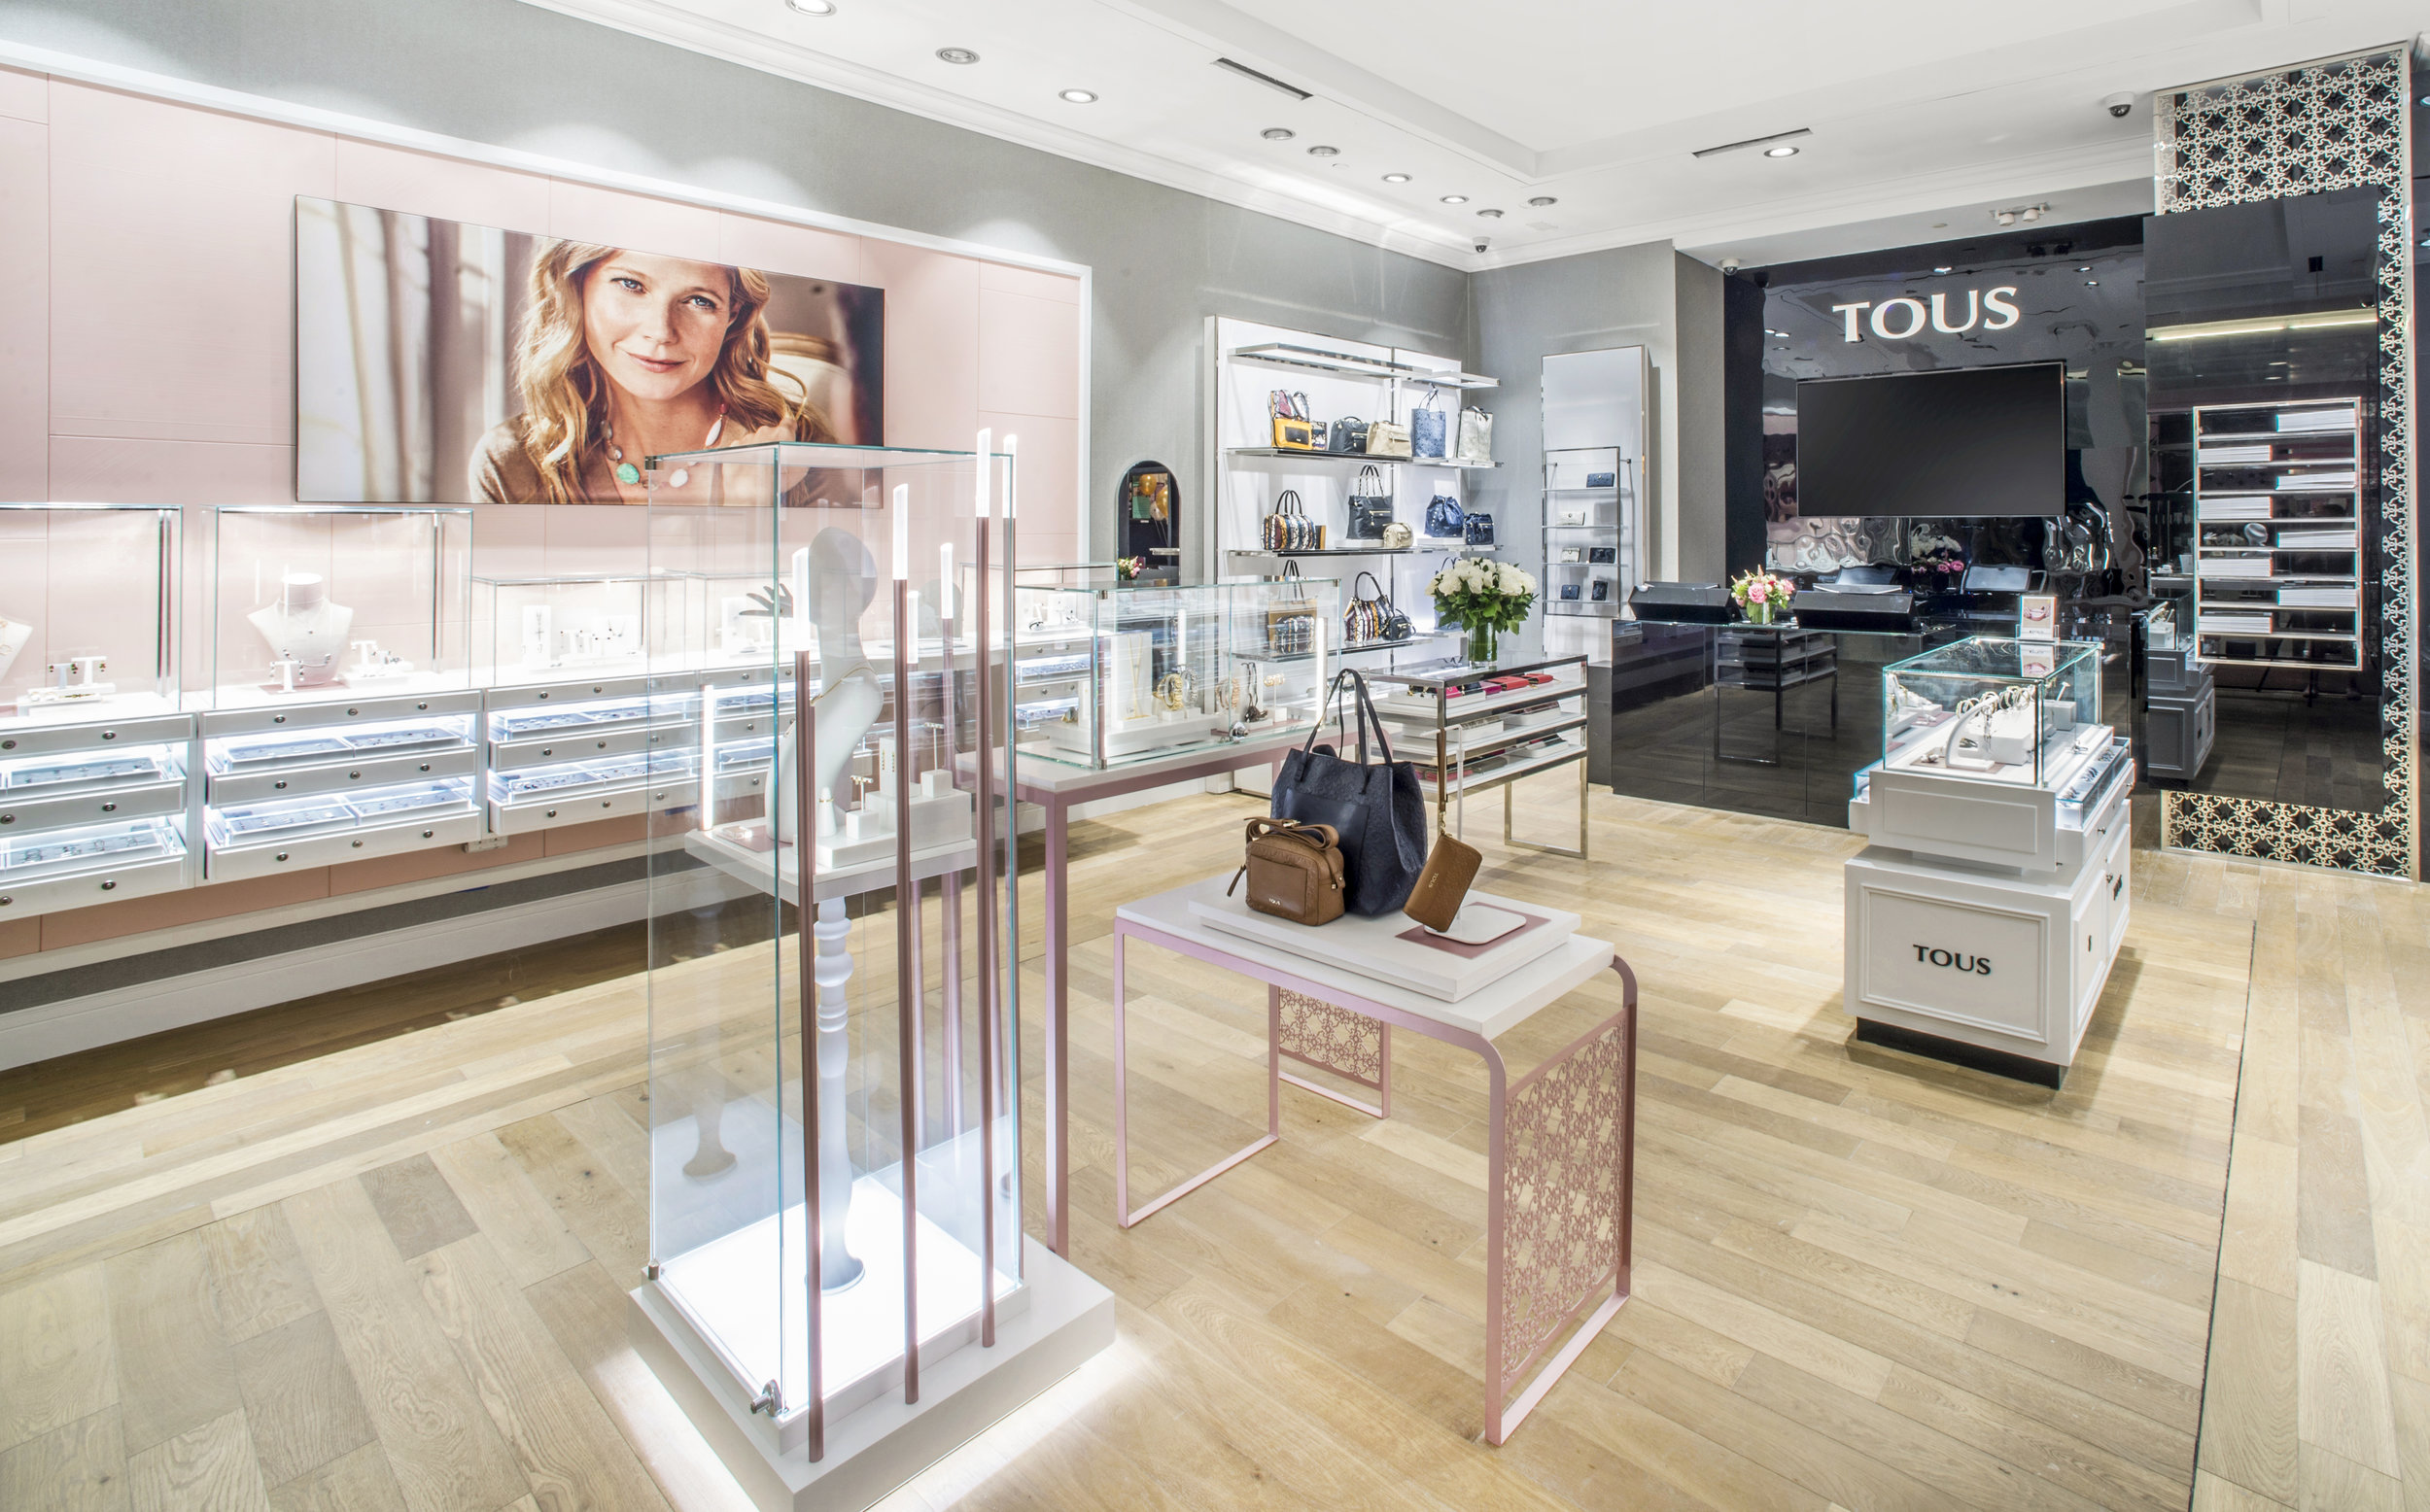 TOUS Westfield Grand Opening 8.19.16 - photo by Andrew Werner.jpg